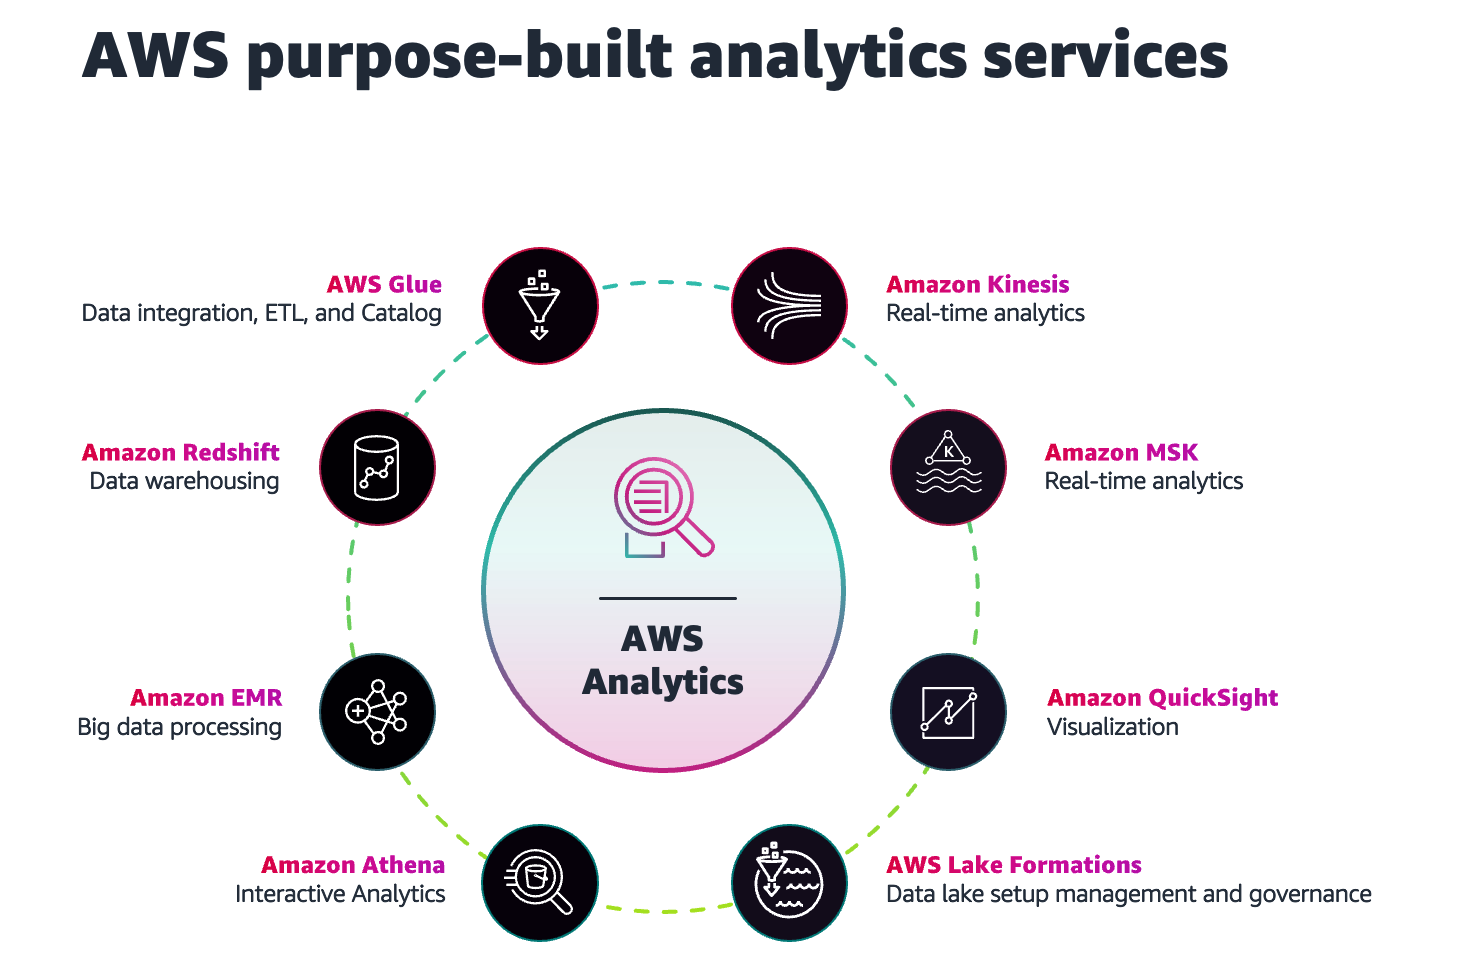 A diagram depicting purpose-built data analytics services on AWS .